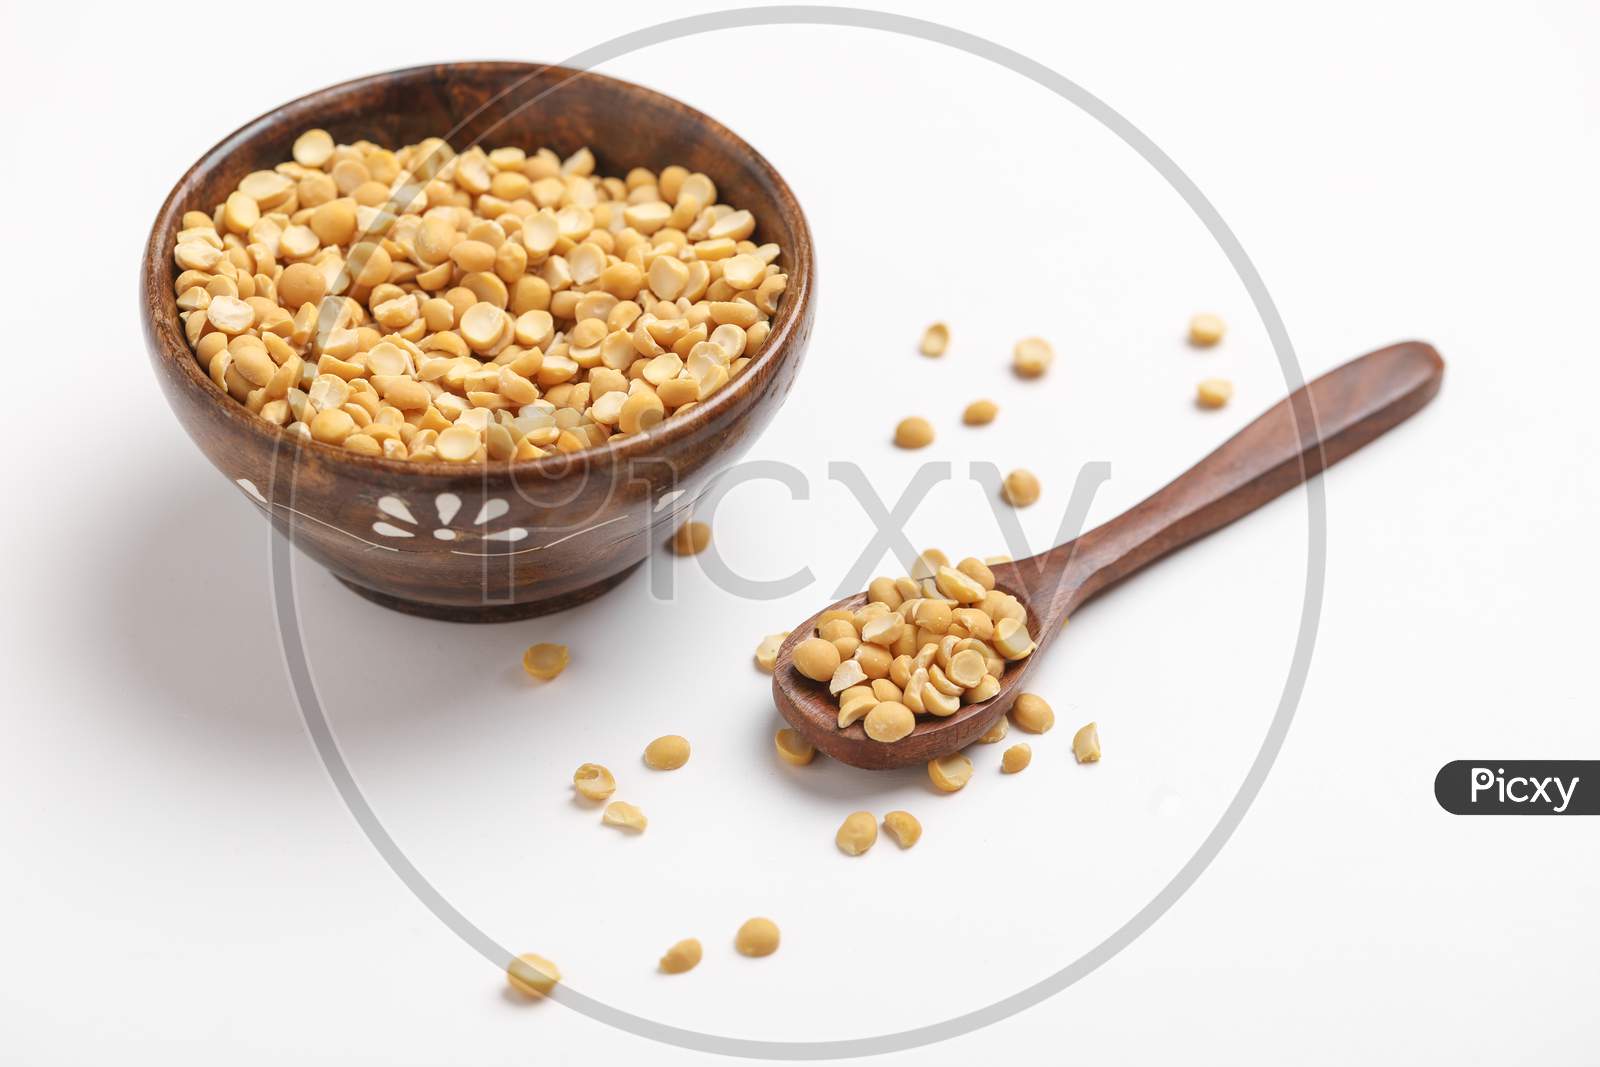 Dried Chickpea Lentils In Wooden Bowl And Spoon On White Background , Split Chickpea Also Know As Chana Dal ,